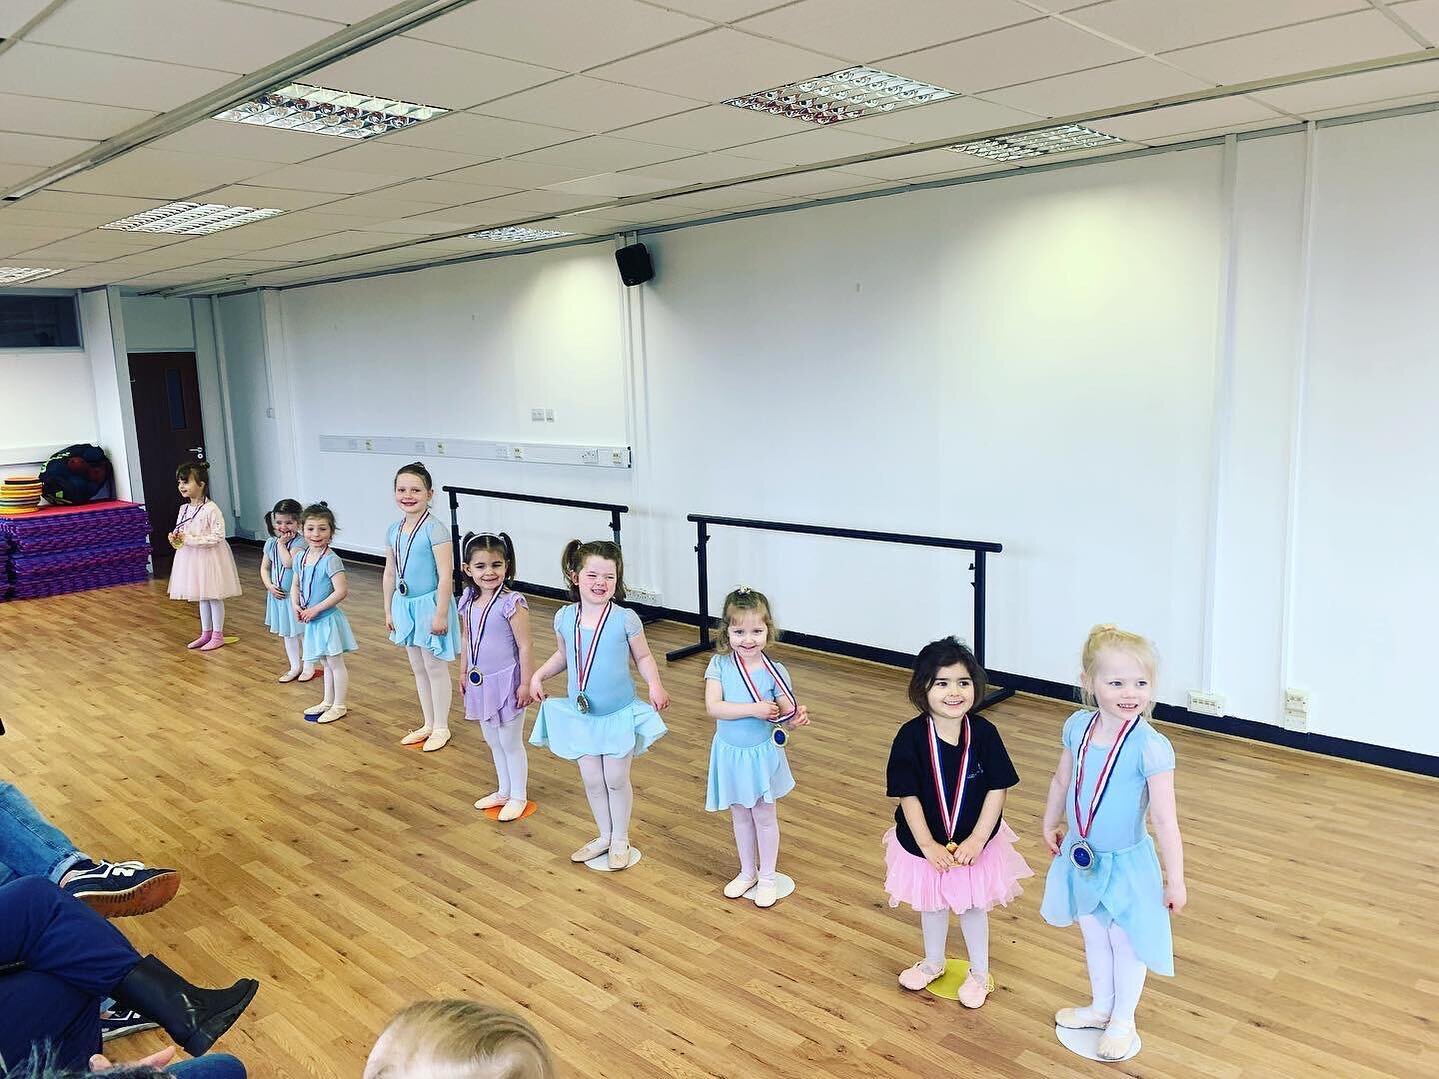 💙 Just reflecting on our wonderful dance school family and how lucky we are to have you all 💙 

💙 Sat here a year to the day of officially announcing our opening and if you could have told myself or Emanuel that we&rsquo;d be where we are now, I w